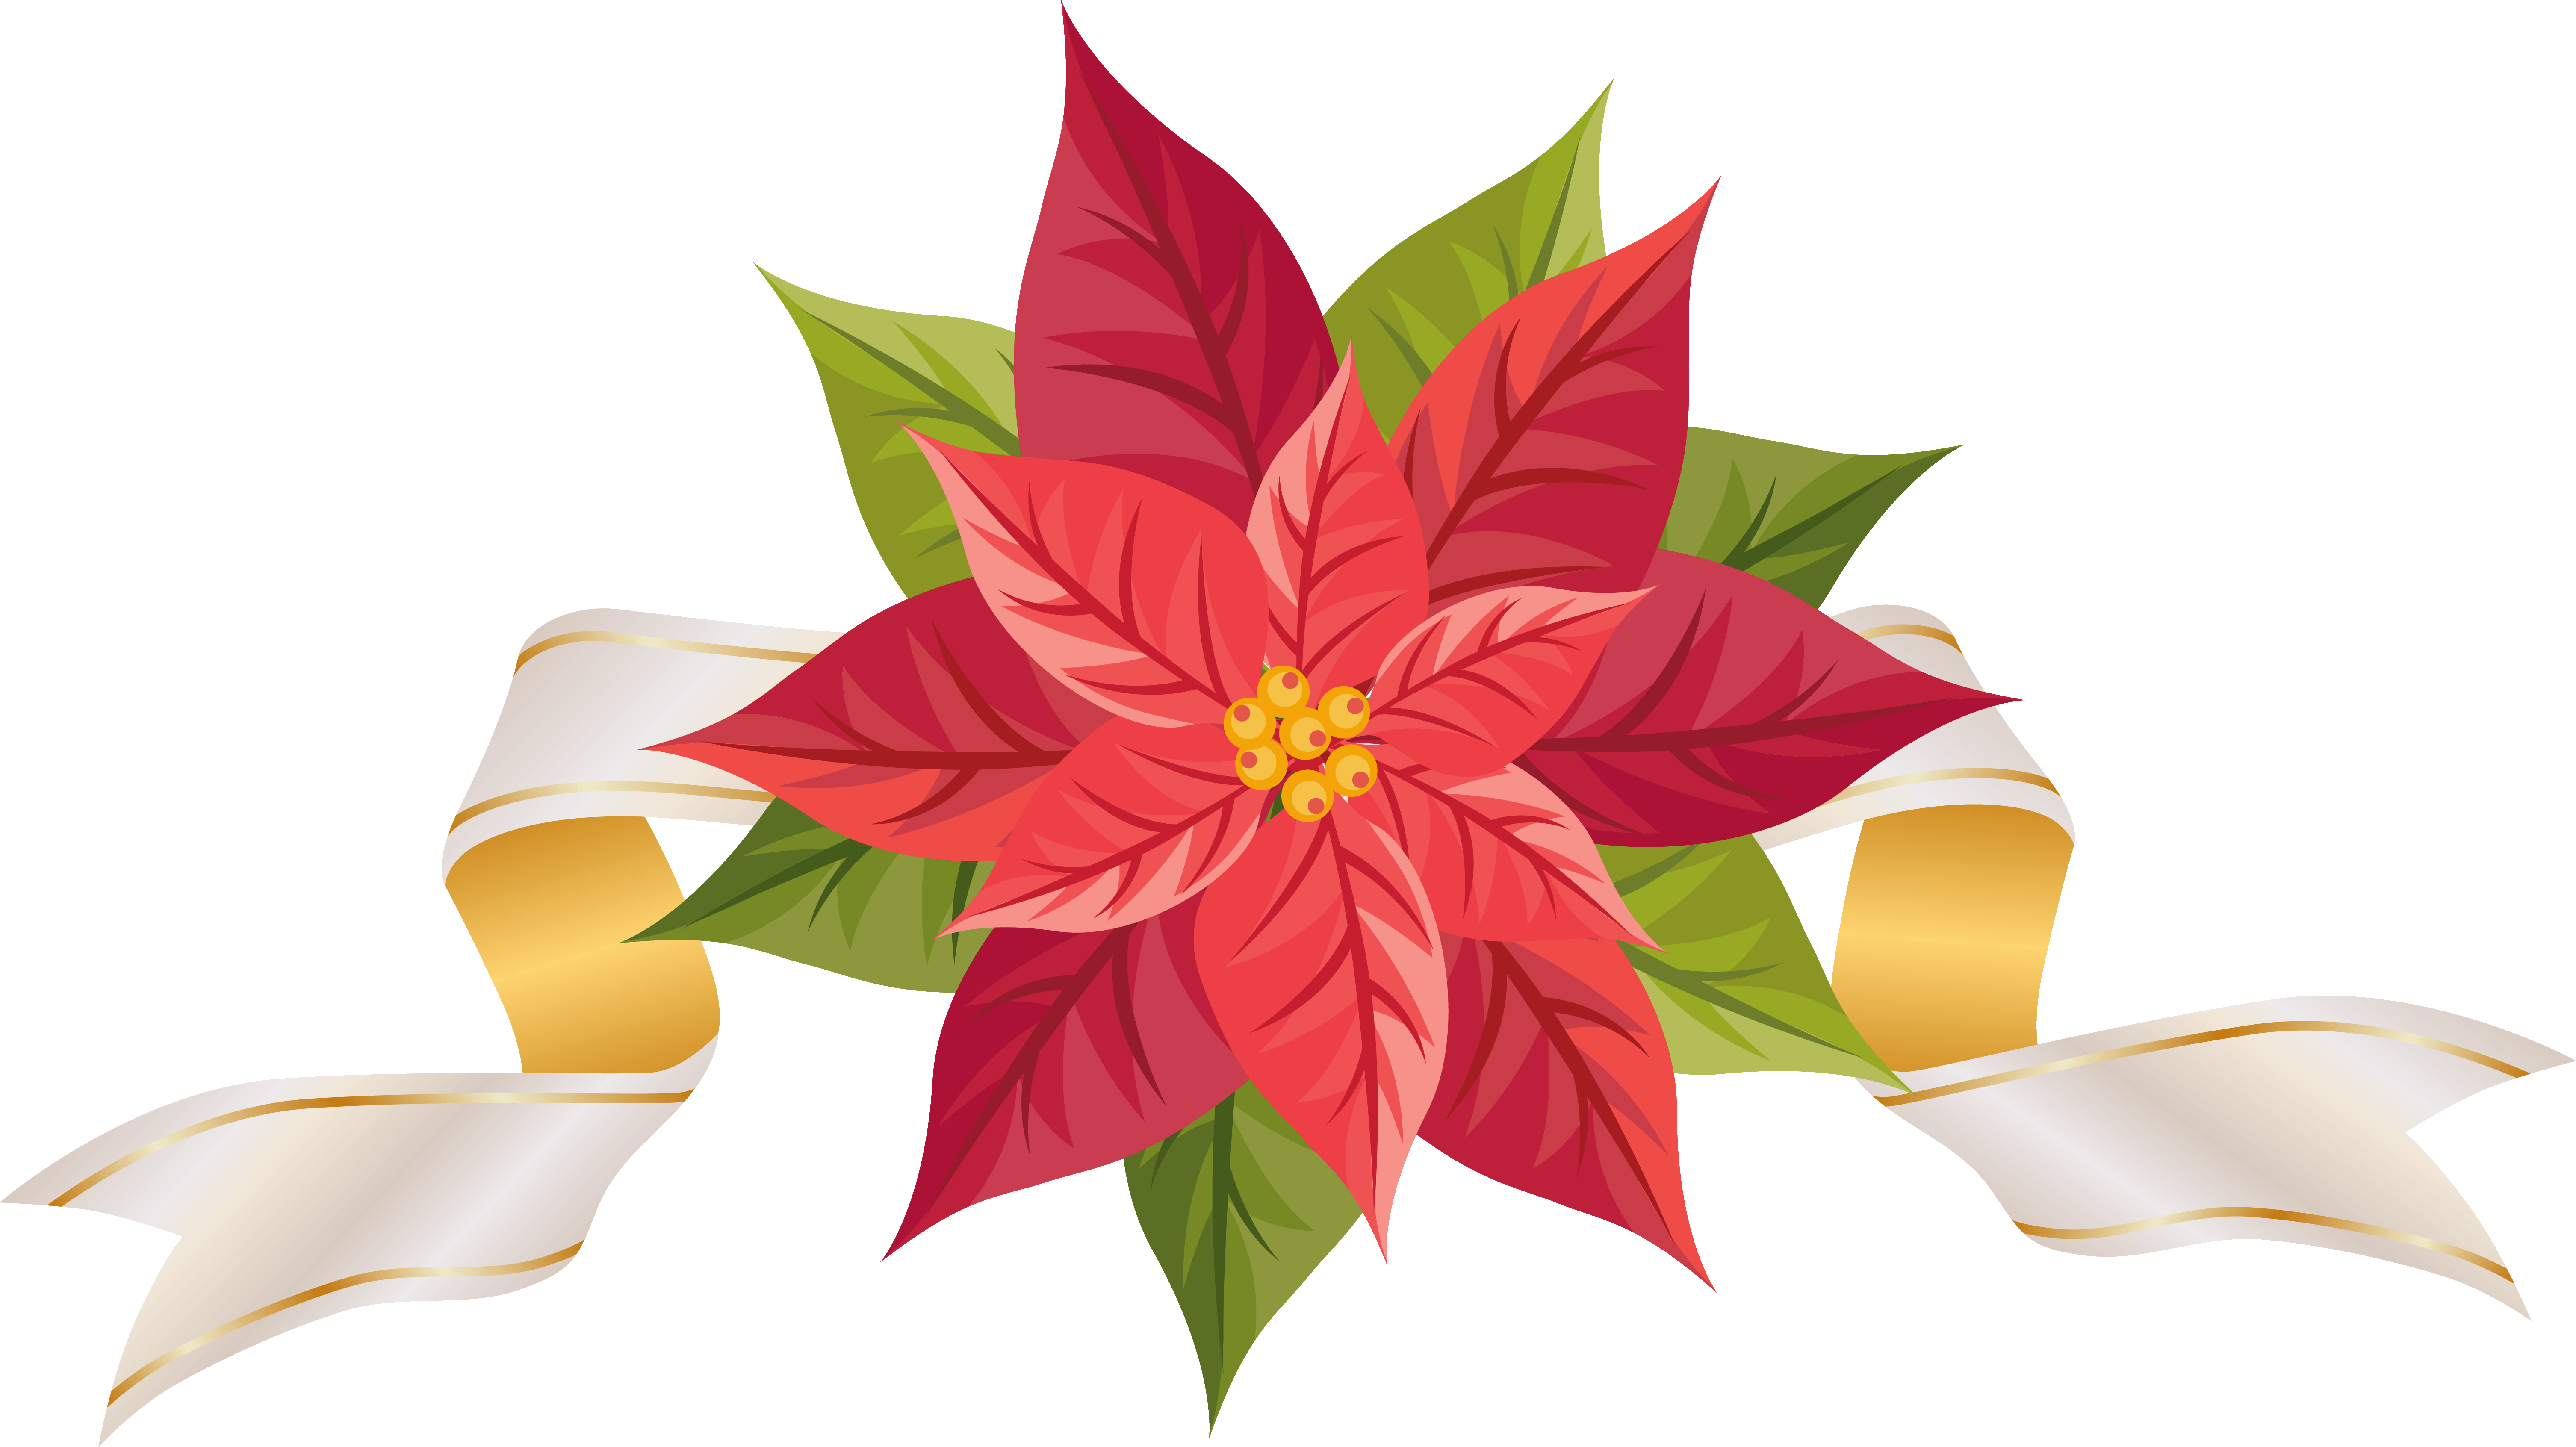 Poinsettia with Ribbon PNG Clipart Image